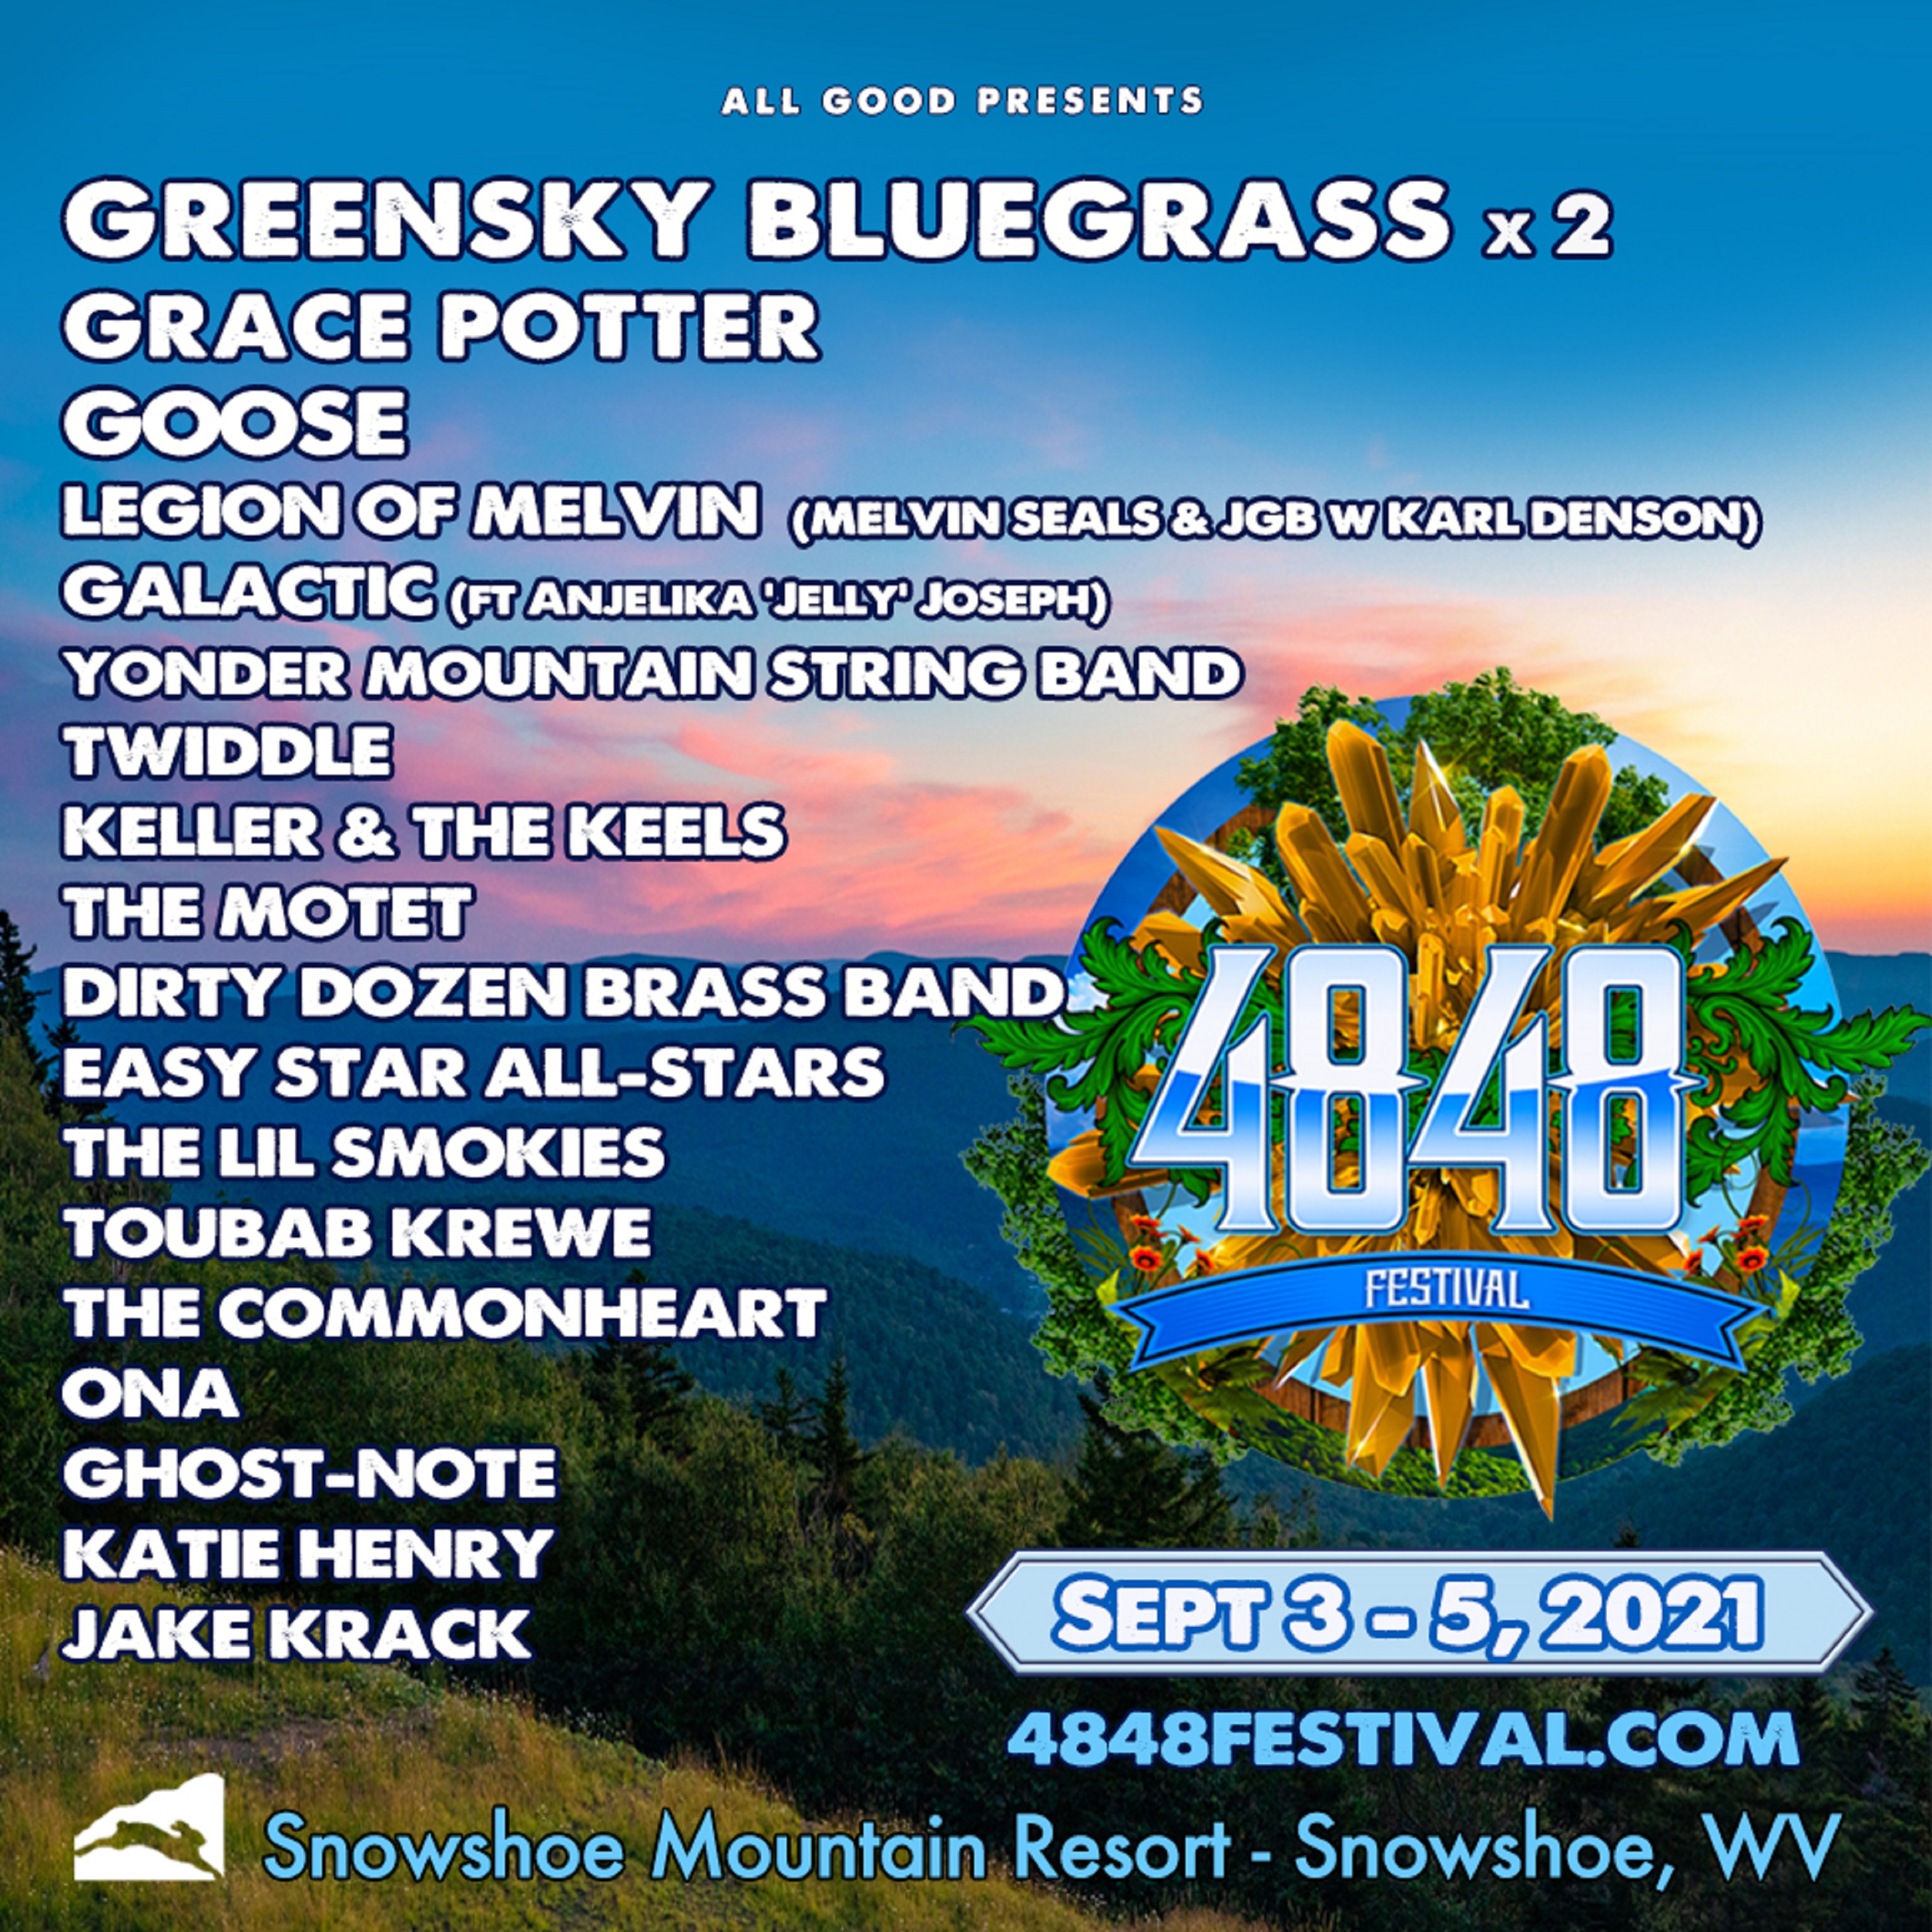 4848 Festival Announces Lineup for Labor Day Weekend Event September 3-5